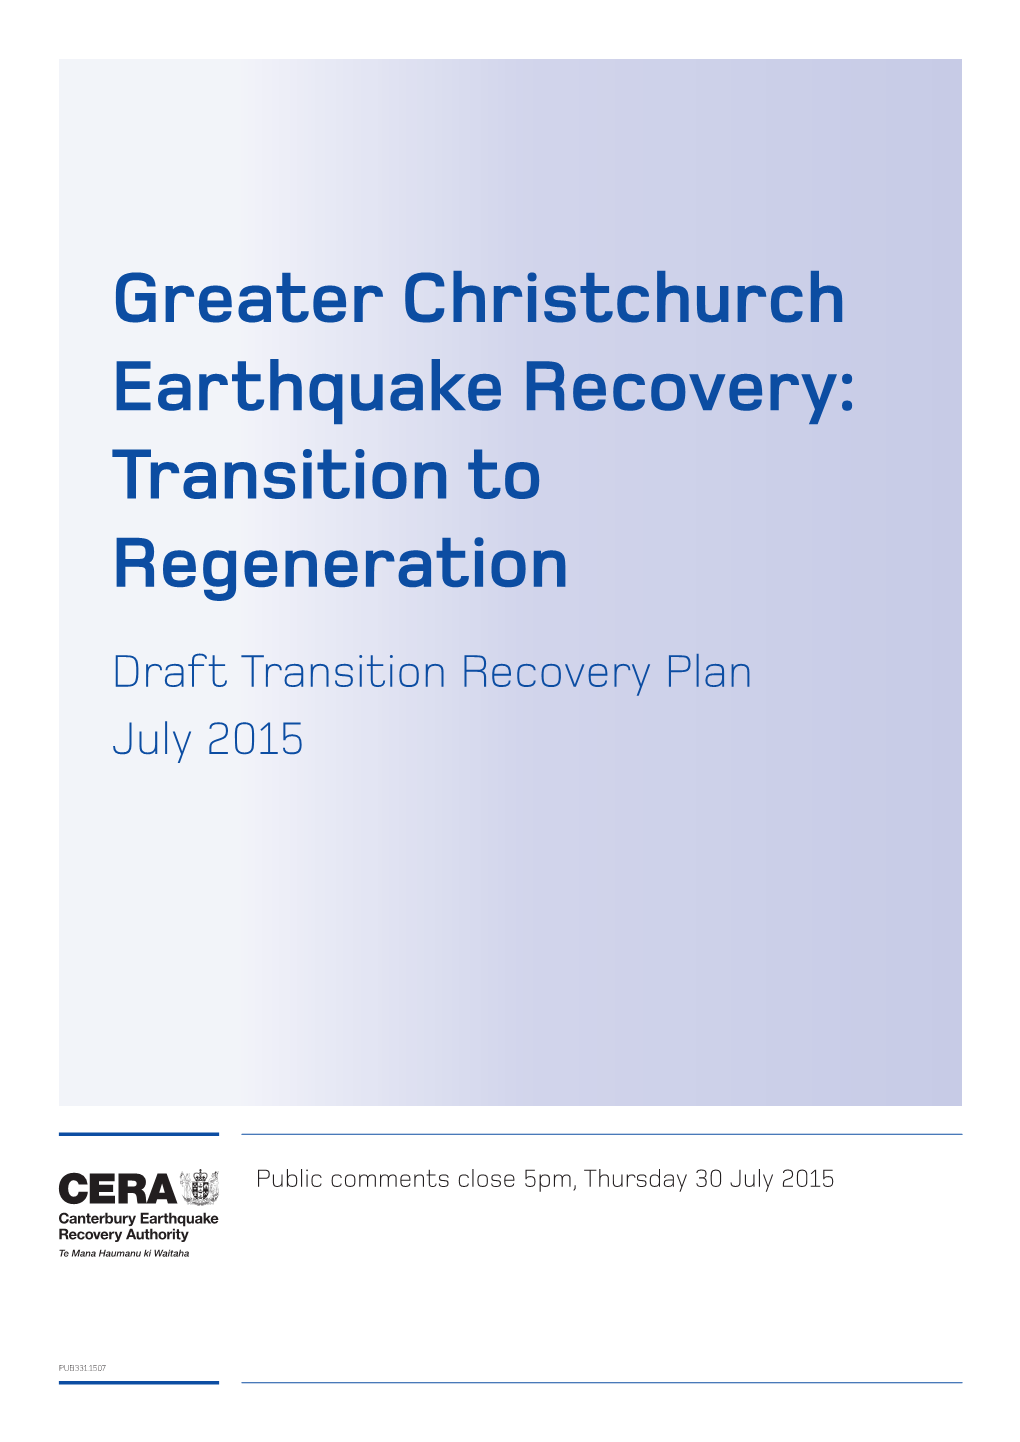 Greater Christchurch Earthquake Recovery: Transition to Regeneration Draft Transition Recovery Plan July 2015